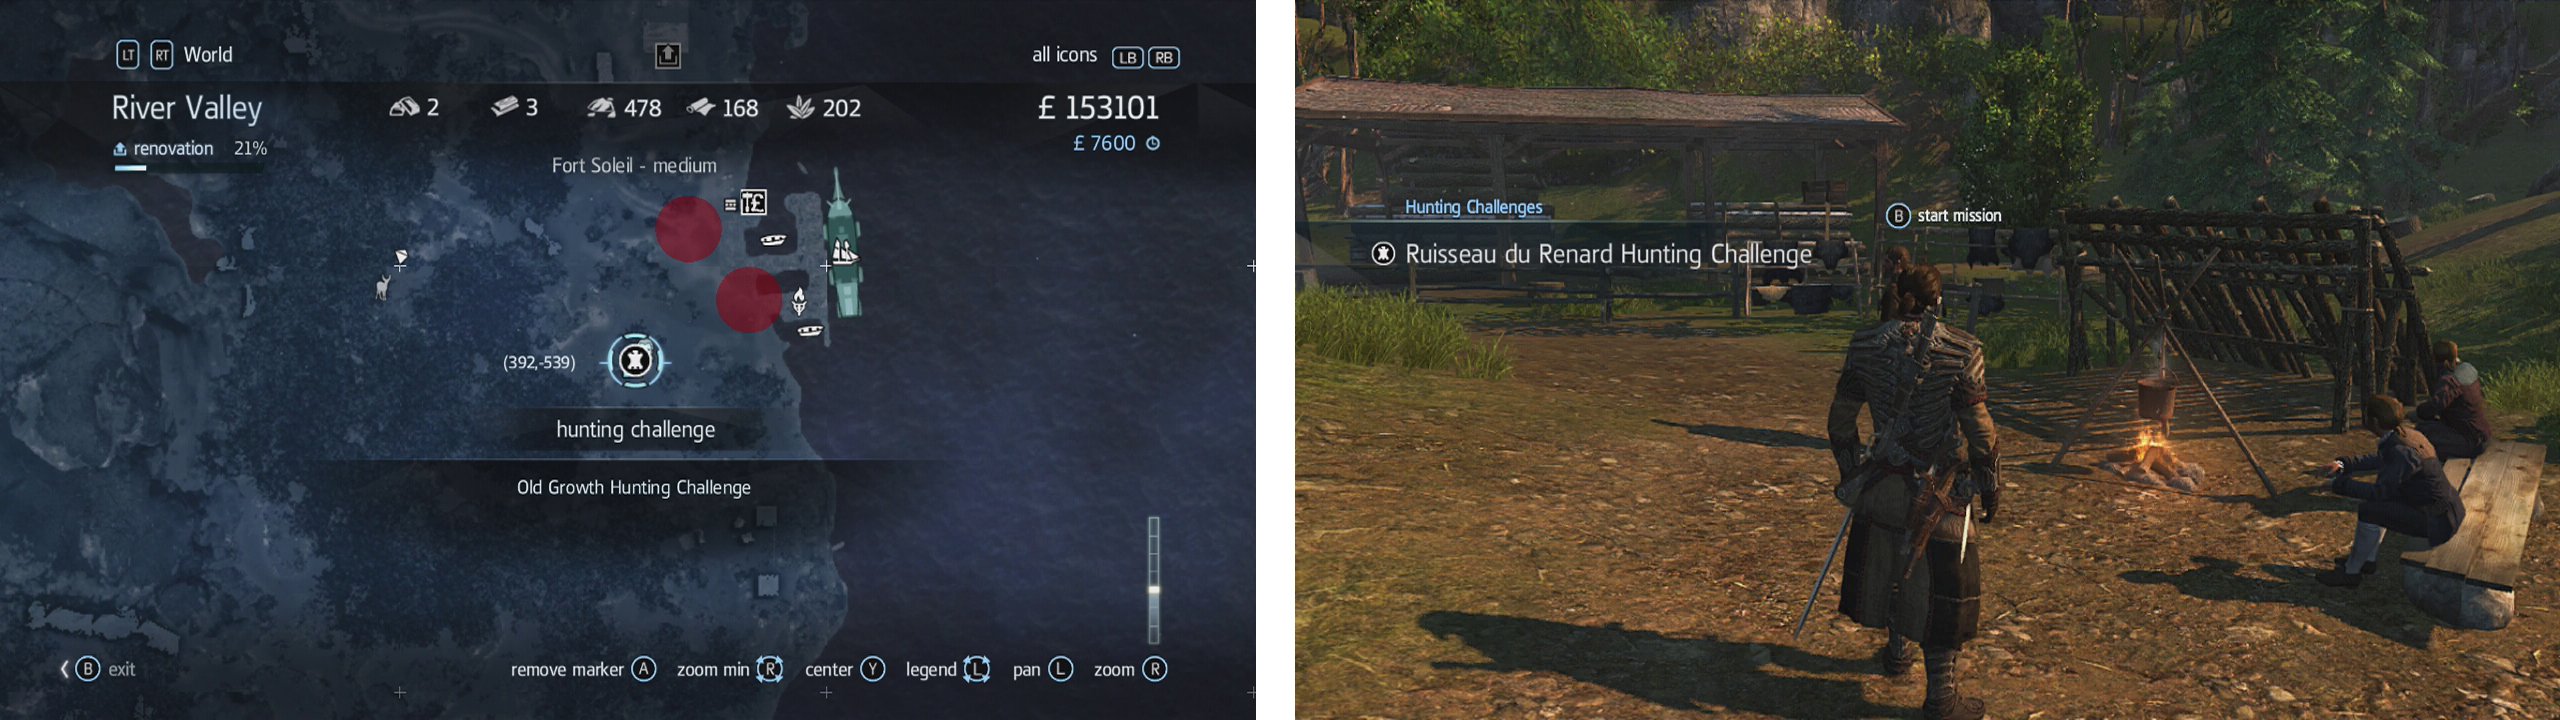 Hunting Challenges are marked by a animal hide icon on the map (left). Approach and talk to the huntern (right) to begin a challenge.